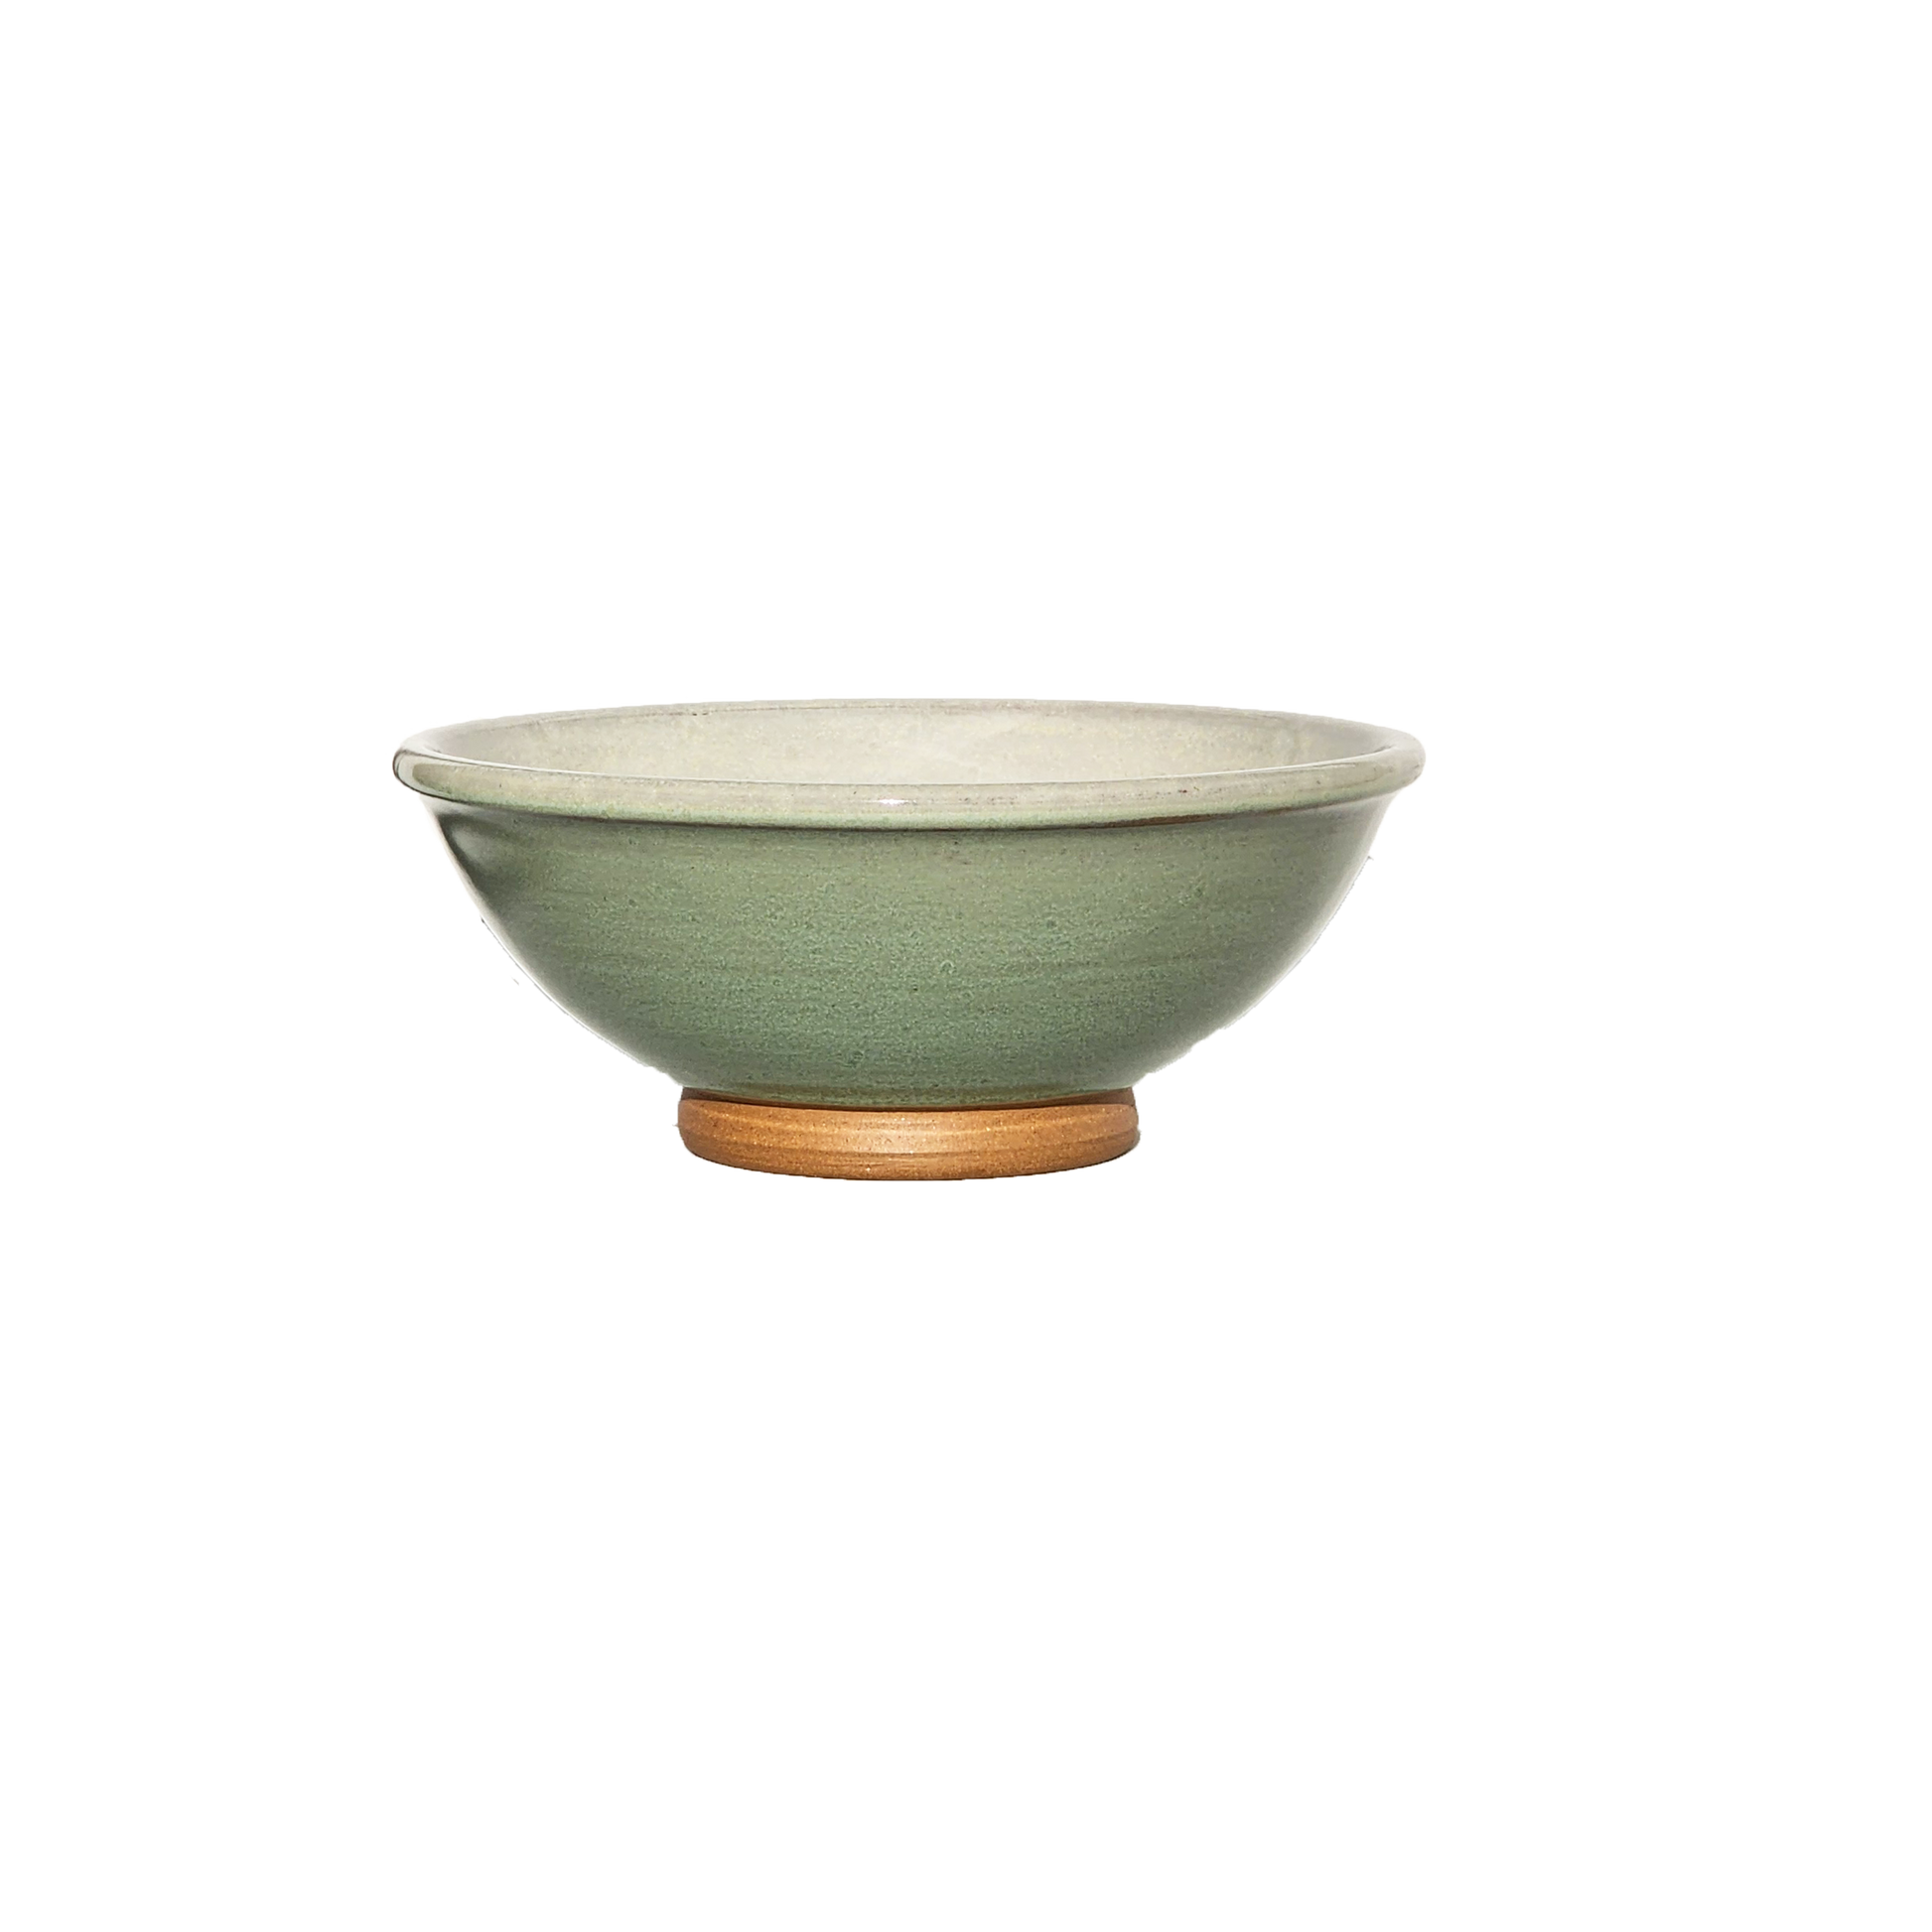 Image: A small mixing bowl in a refreshing light green color, providing a capacity of 2.25 cups. Perfect for ingredients, snacks, or condiments, this bowl adds a pop of freshness and vitality to your kitchen.